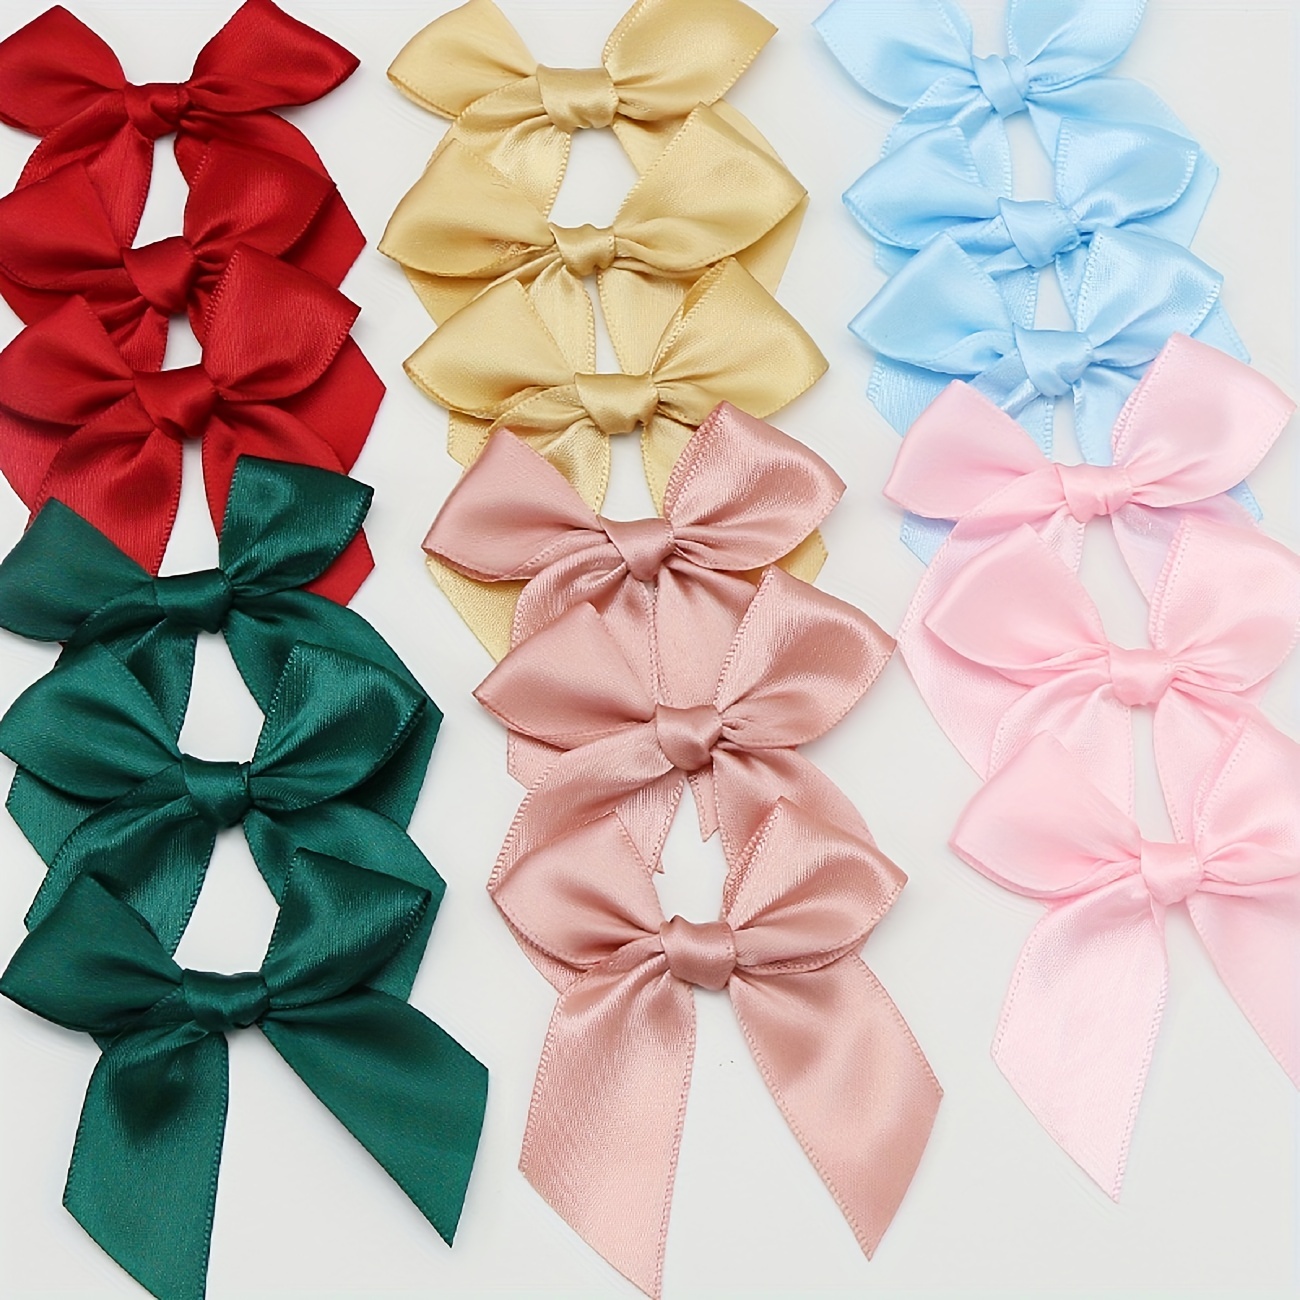 

50pcs, Large Satin Ribbon Bows Knot Craft Bows (3.1"x2.8") Pink White Small Flower Gift Tie Wedding Decoration Bow Bowknot Diy Birth Party Baking Decoration